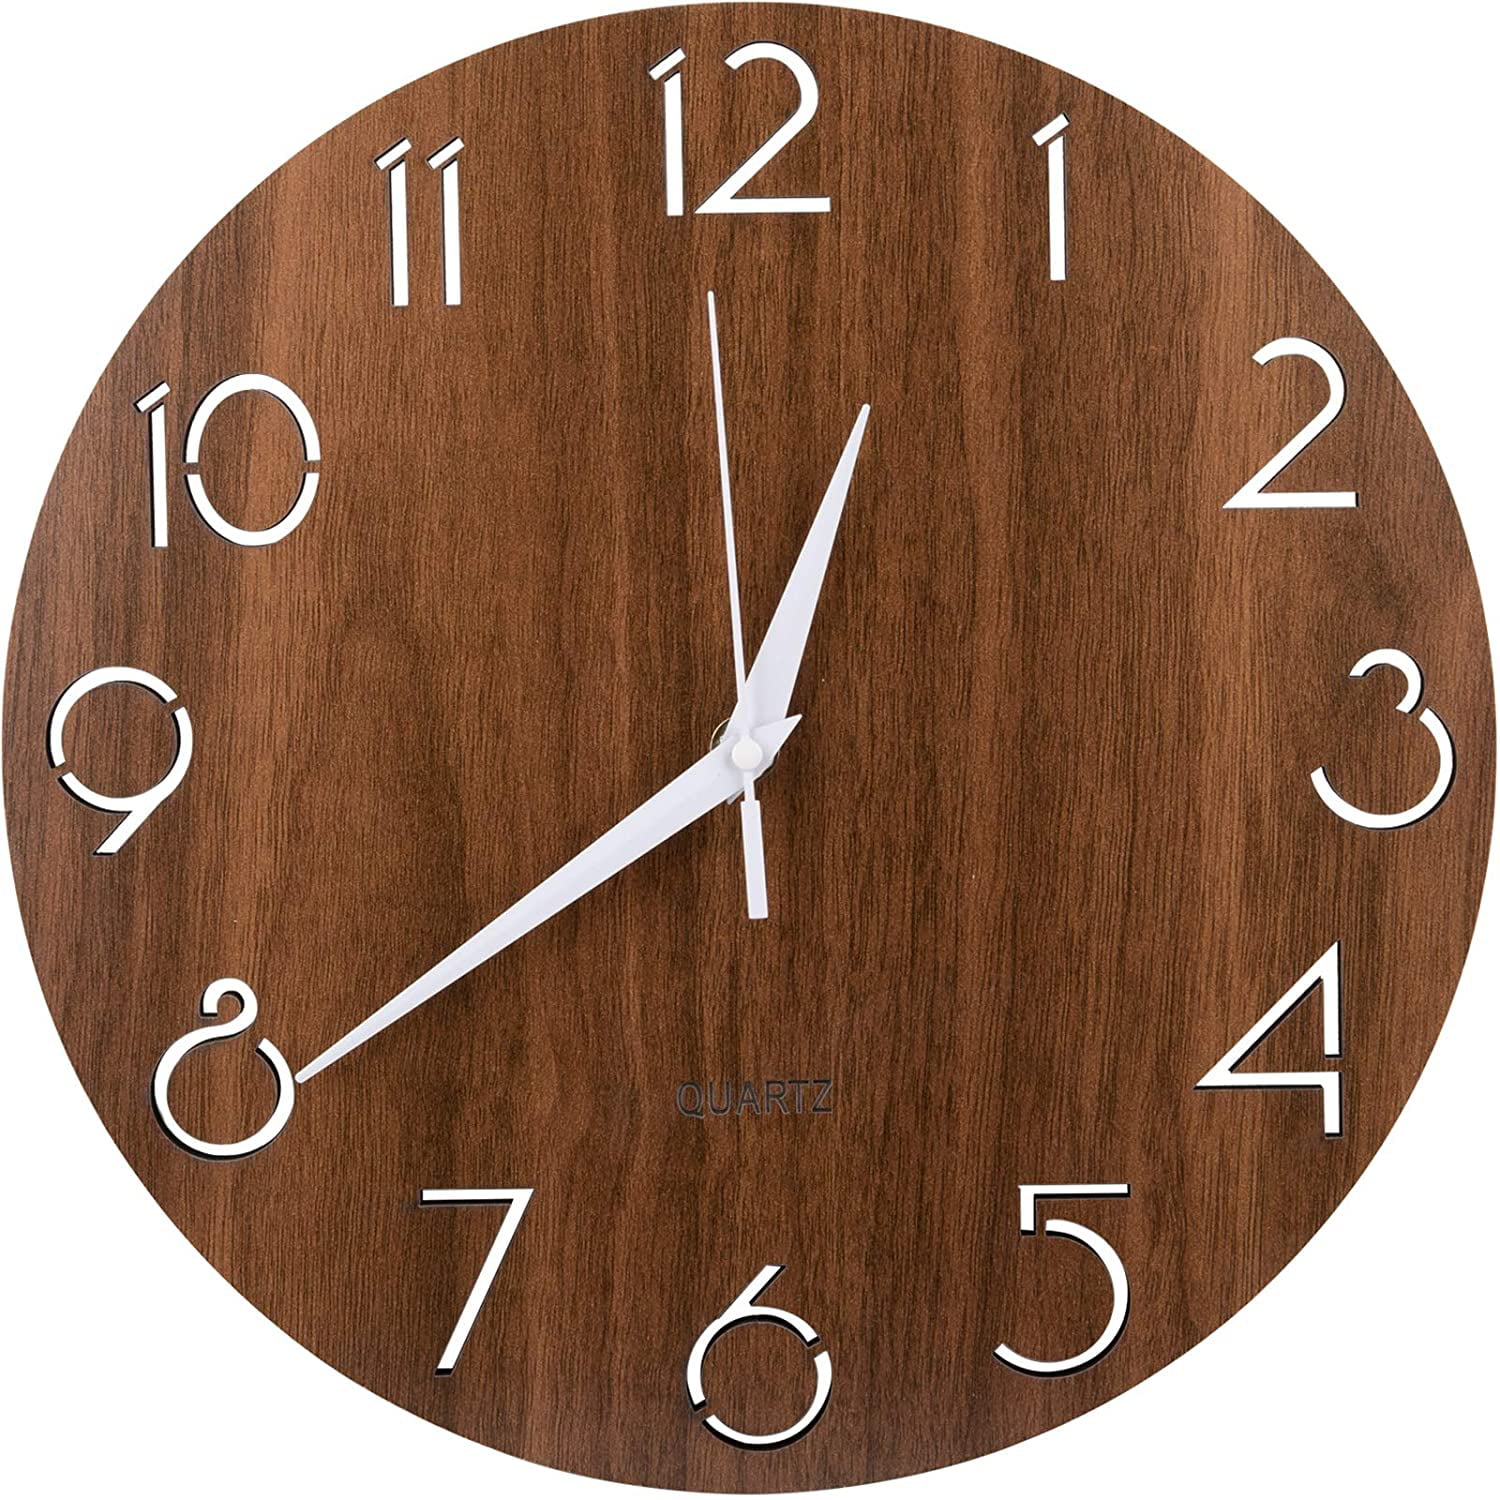 Skating Skateboard Wall Clock Silent Non Ticking Wall Clocks Battery Operated 12 Inch Farmhouse Clock for Living Room Bedroom Kitchen Bathroom Office